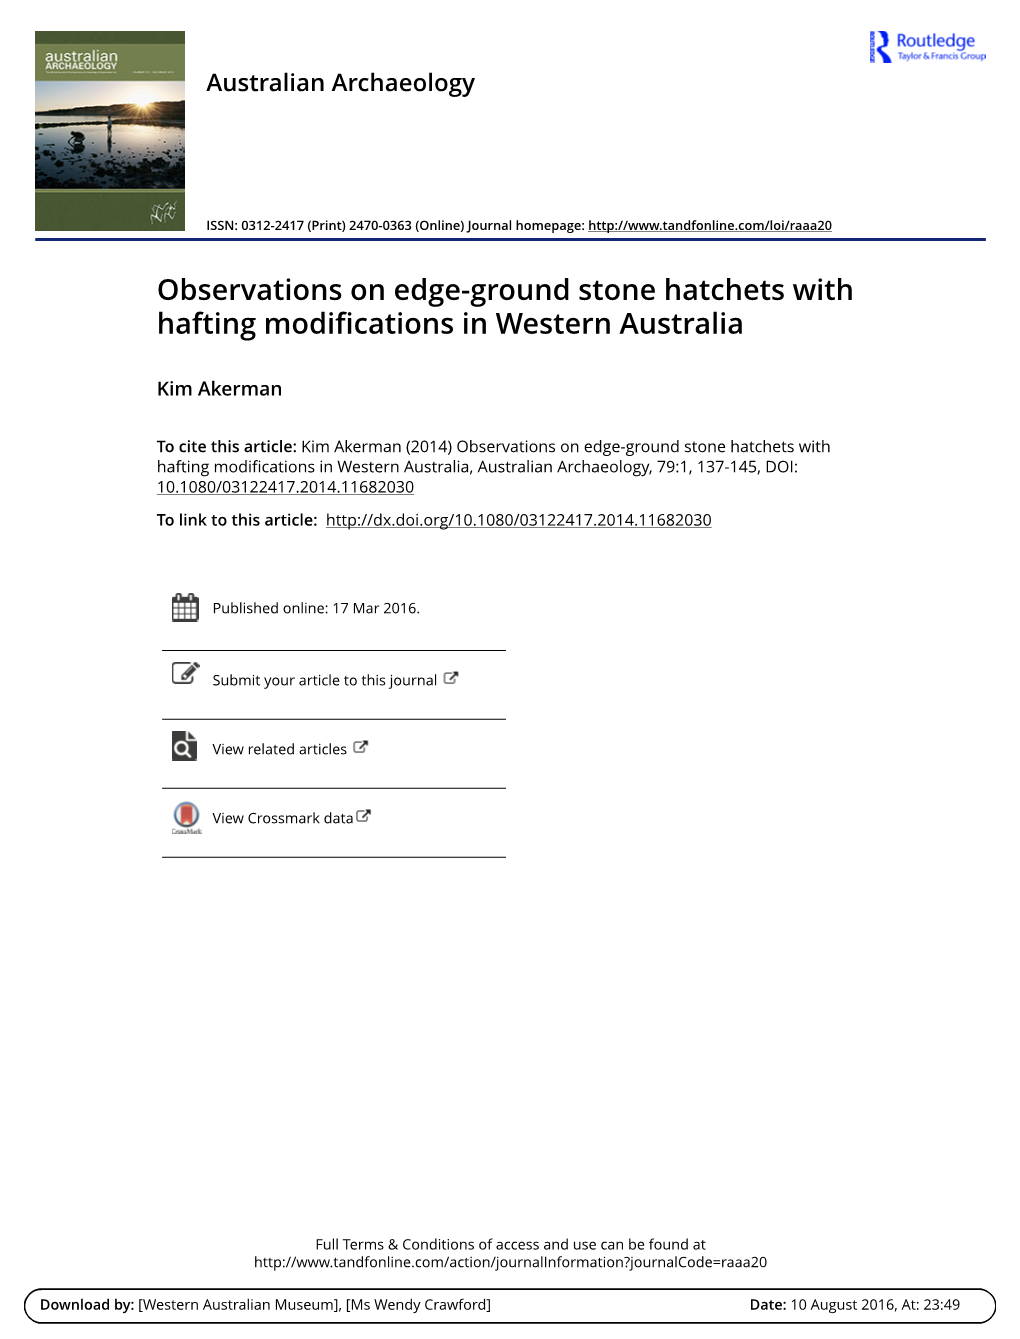 Observations on Edge-Ground Stone Hatchets with Hafting Modifications in Western Australia